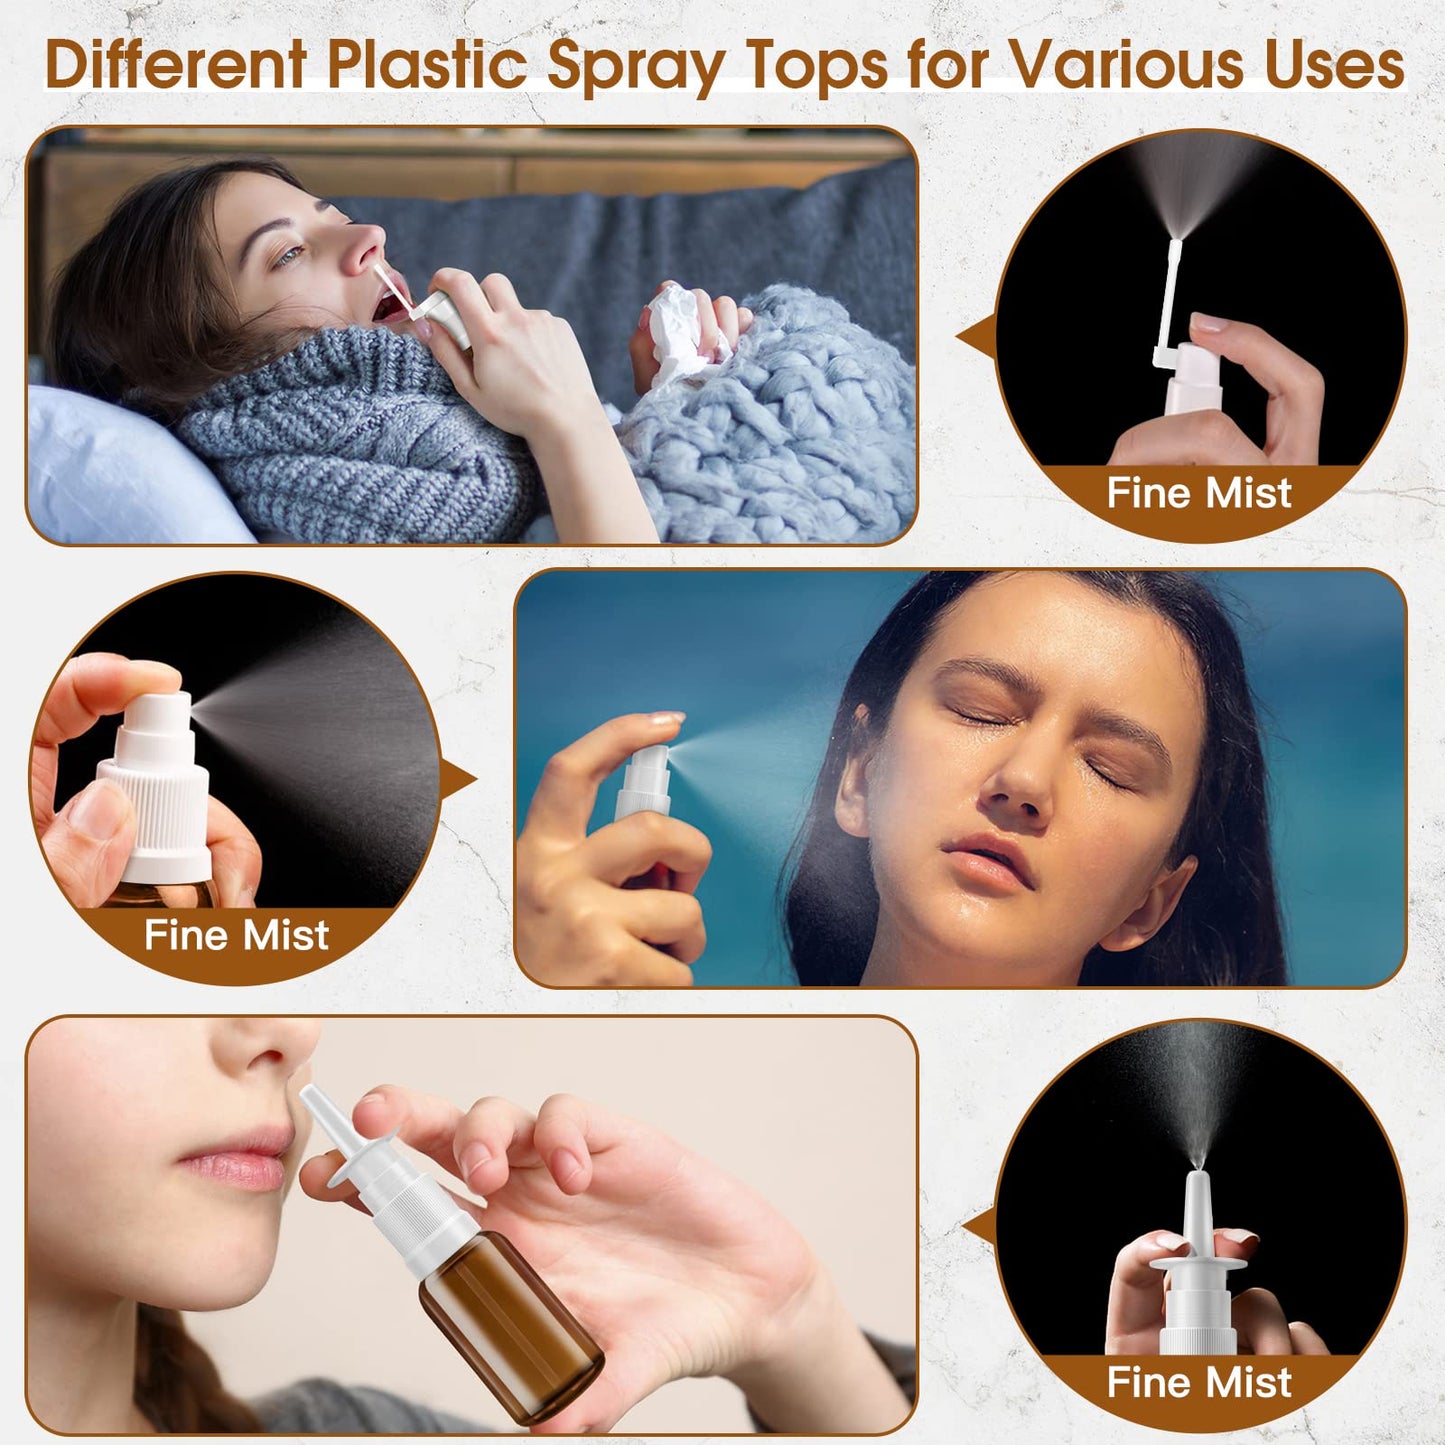 YAKESD Nasal Spray Bottle, 6 Pcs 30ML/1oz Glass Amber Refillable Fine Mist Sprayers Atomizers, Small Empty Nasal Sprayer with Oils Spray Tops, Oral/Swivel Sprayers, Funnels and Labels